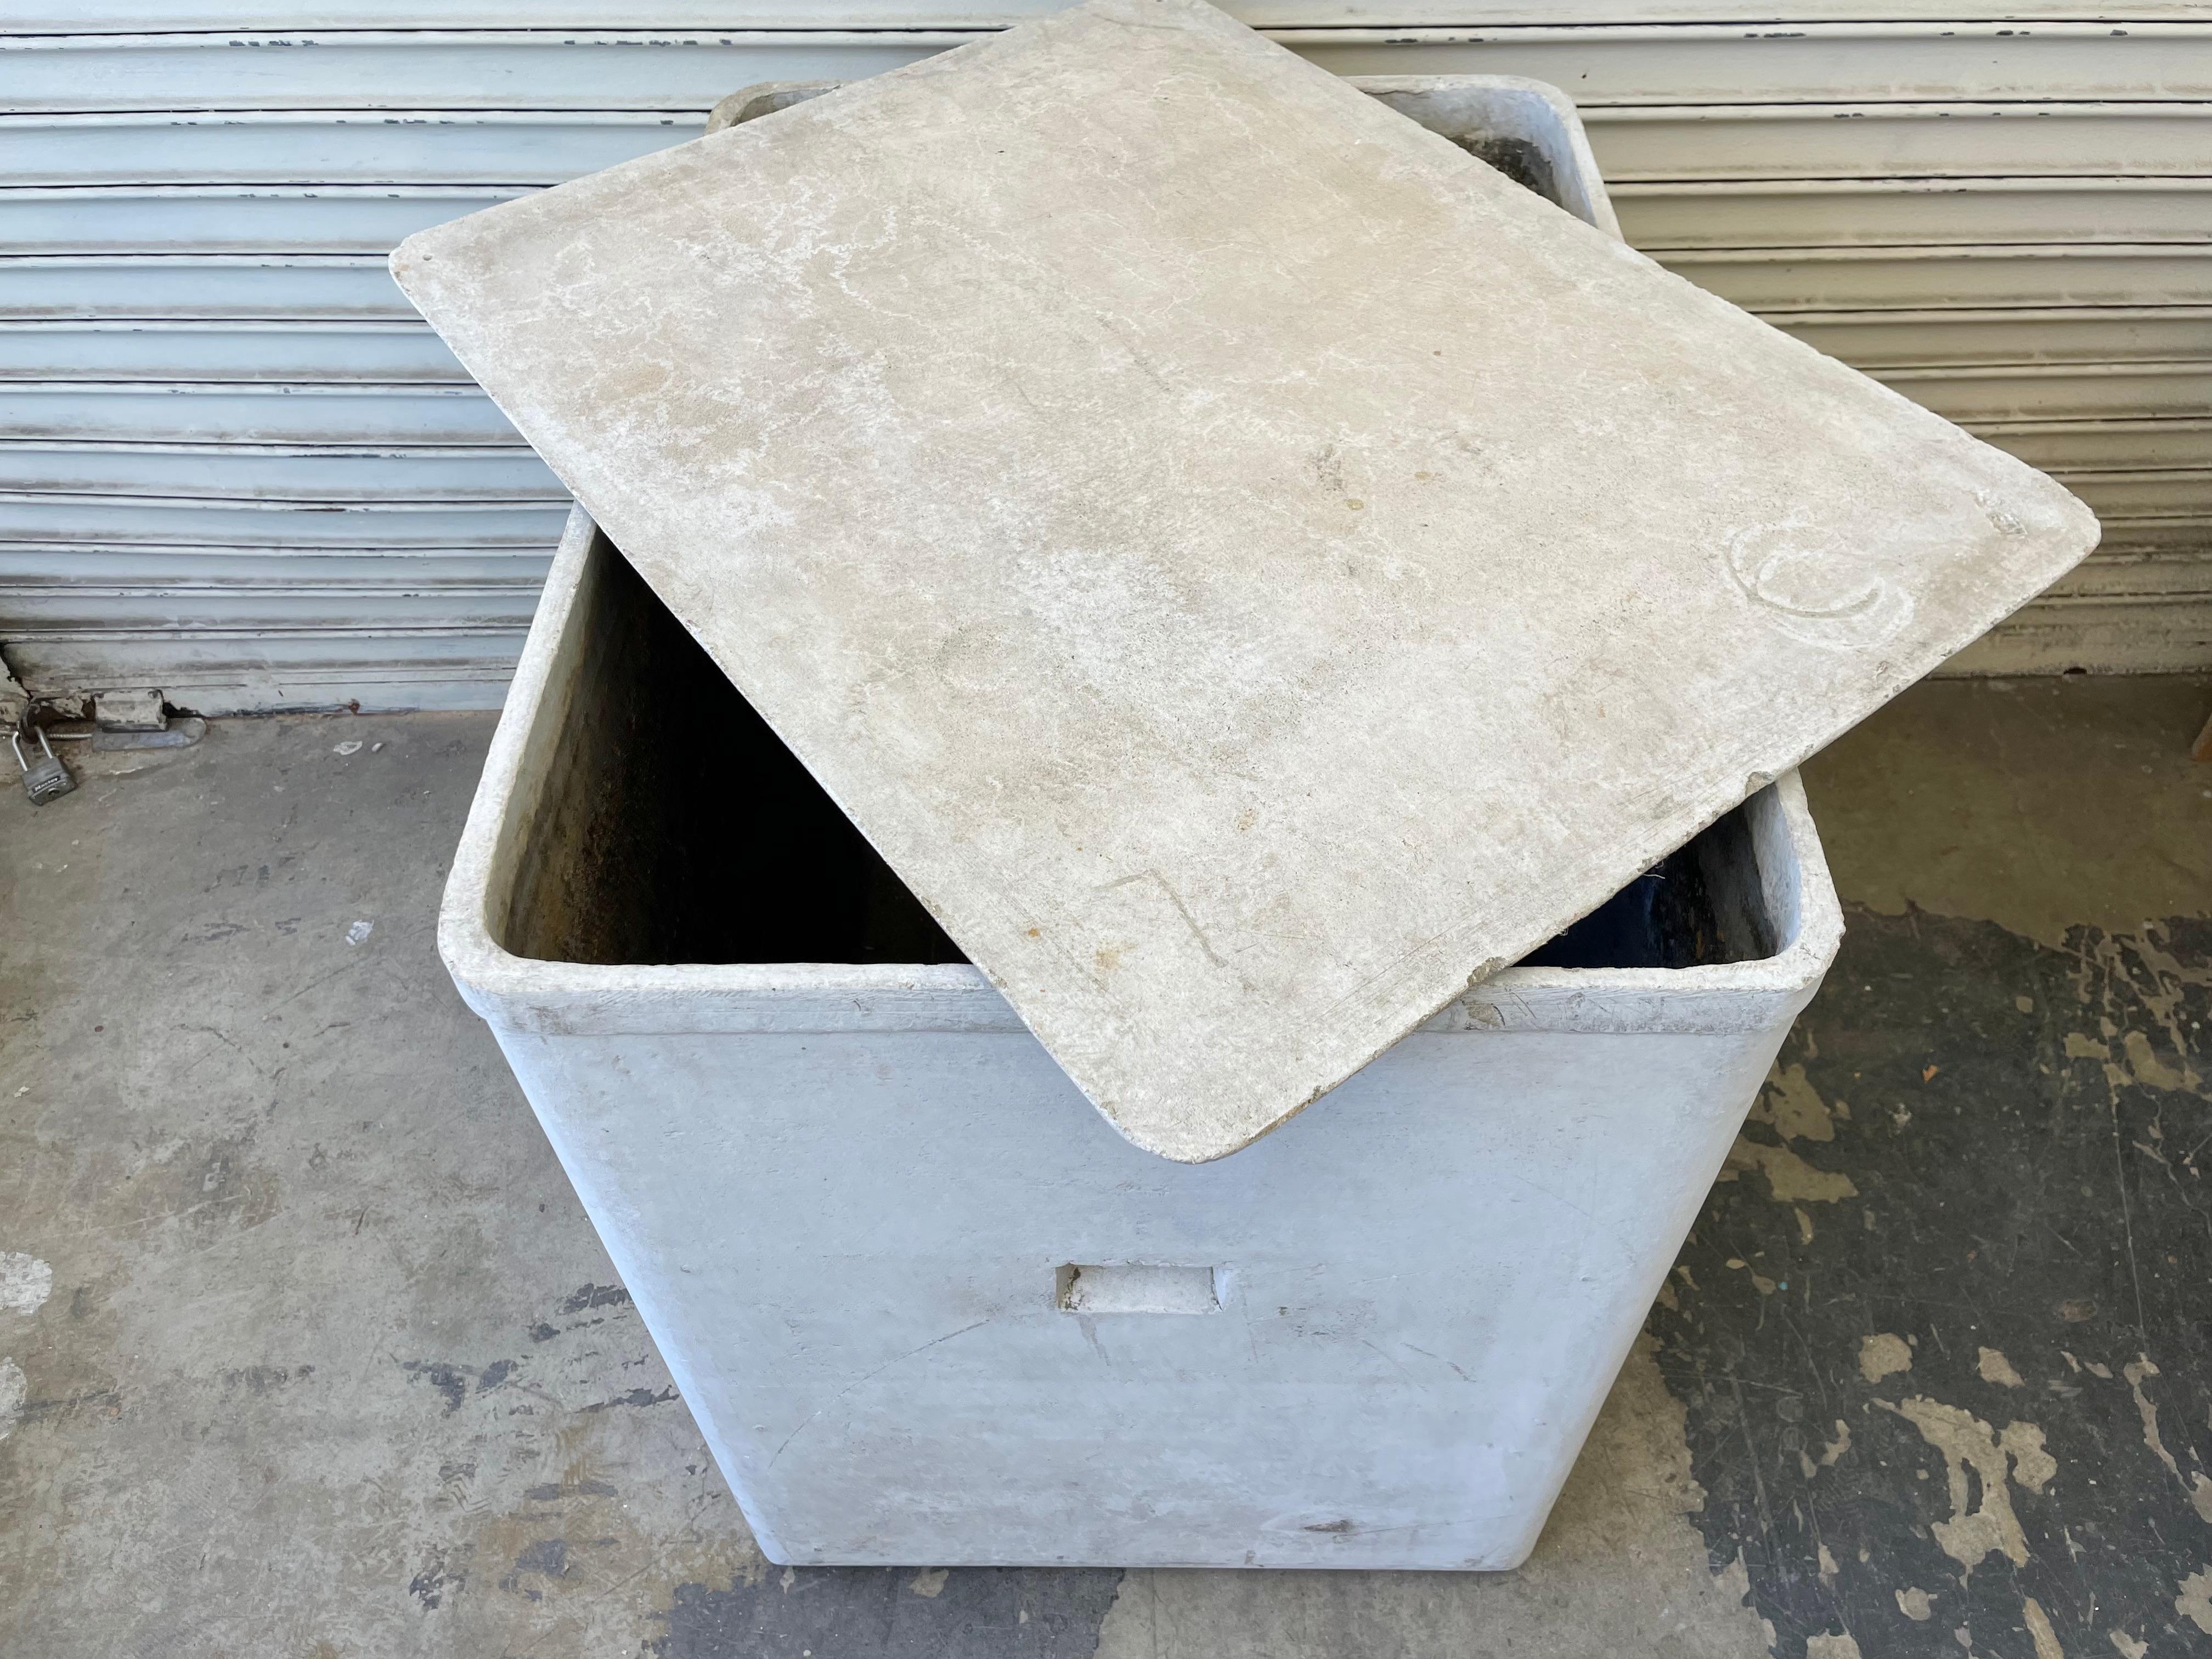 Monumental concrete box by Swiss designer Willy Guhl. Two sides with indented handles and two sides are flat concrete. Removable concrete lid. Functional piece, ideal for outdoor or indoor storage. Perfect for hiding gardening materials, tools,